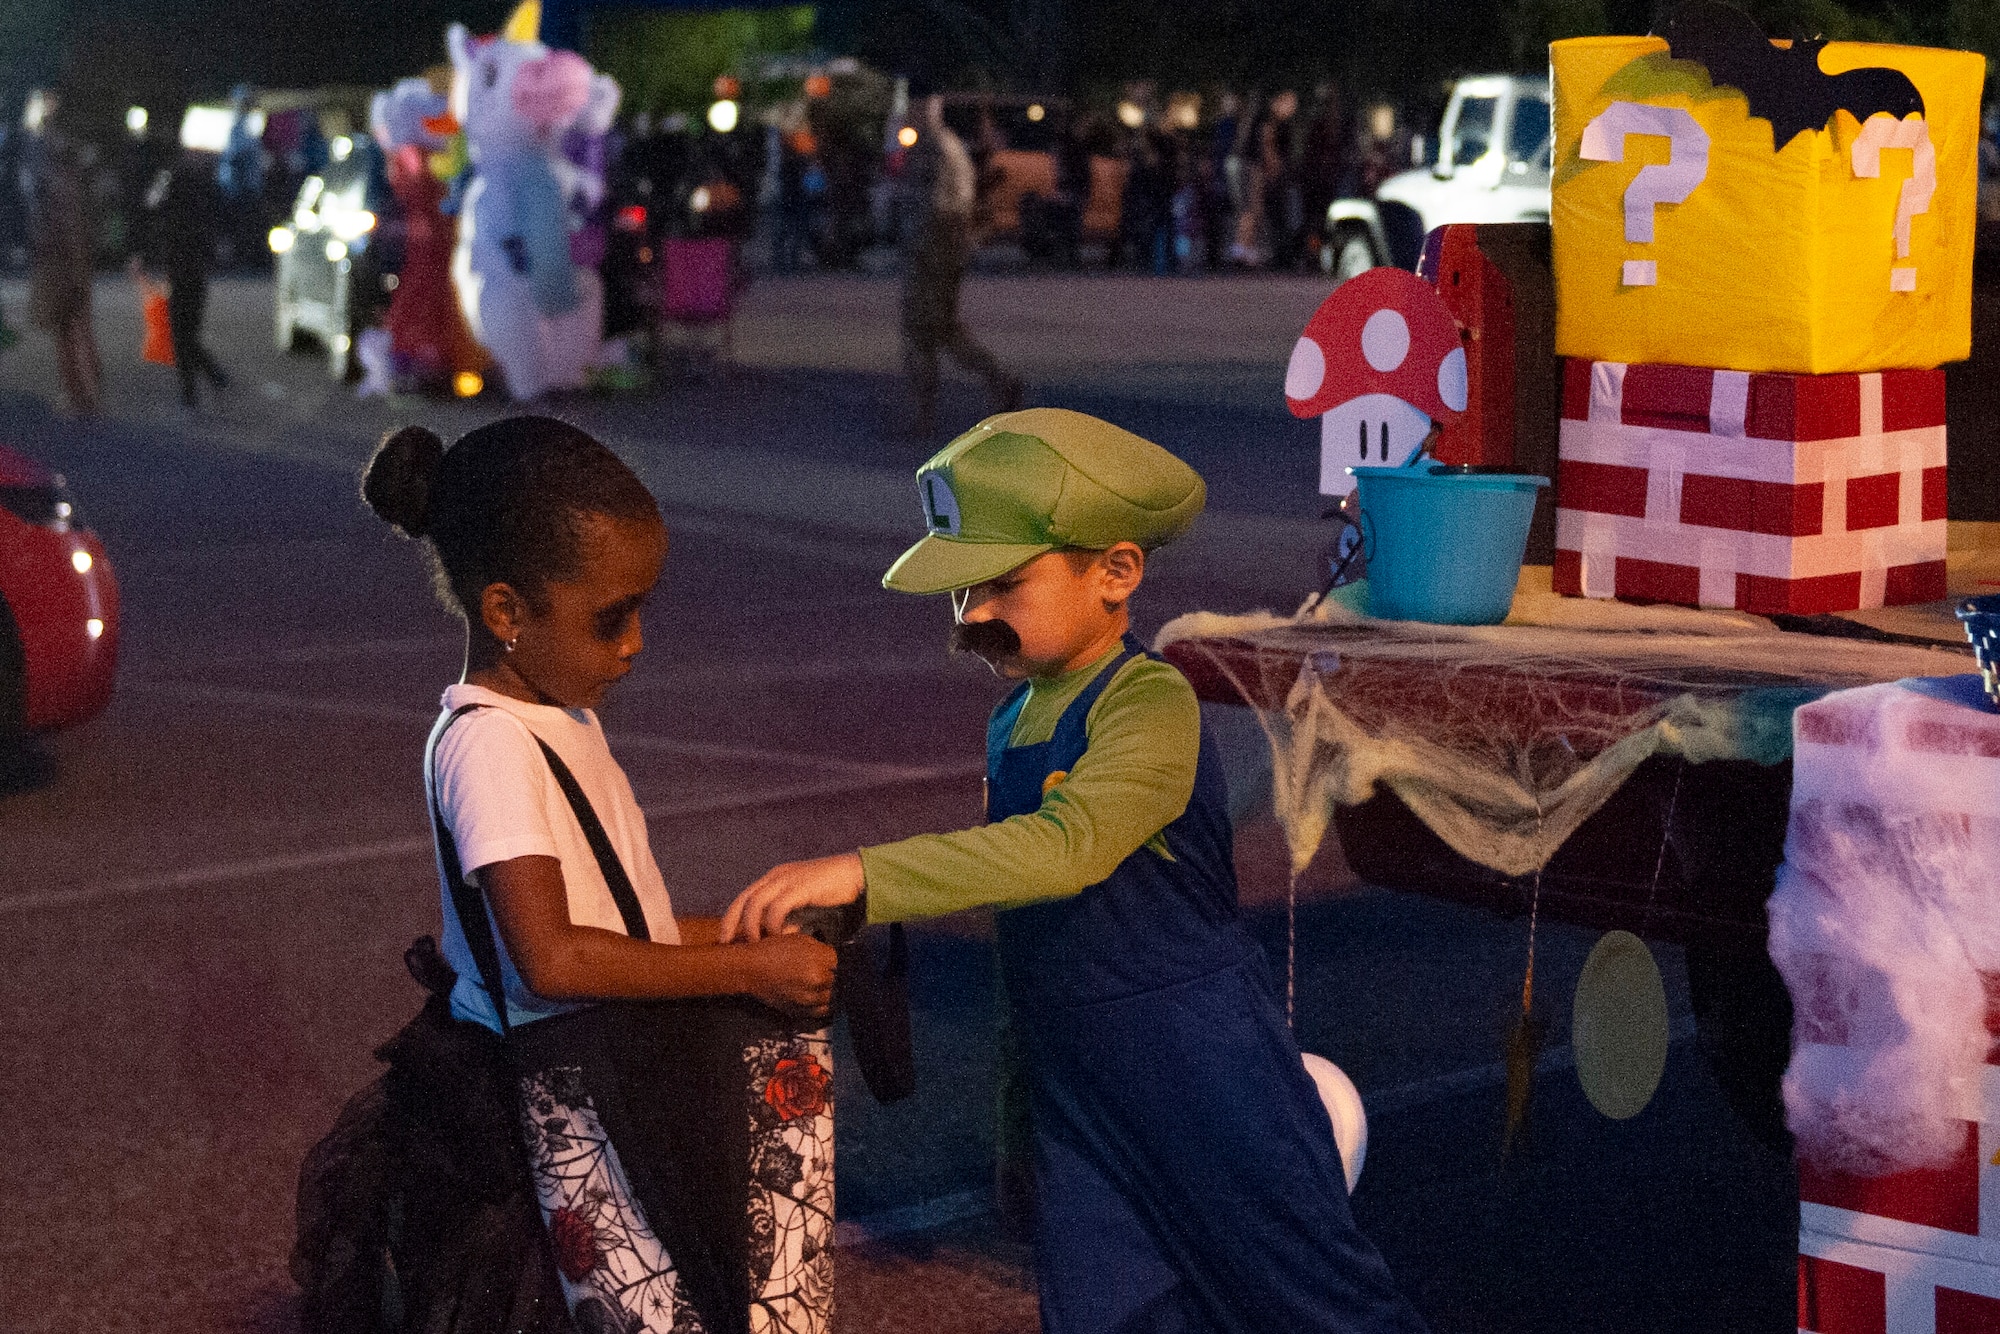 A participant receives candy during Trunk or Treat Oct. 25, 2019, at Moody Air Force Base, Ga. Participants, dressed in costumes, received candy from volunteers, who decorated their trunks. (U.S. Air Force photo by Airman 1st Class Jasmine M. Barnes)